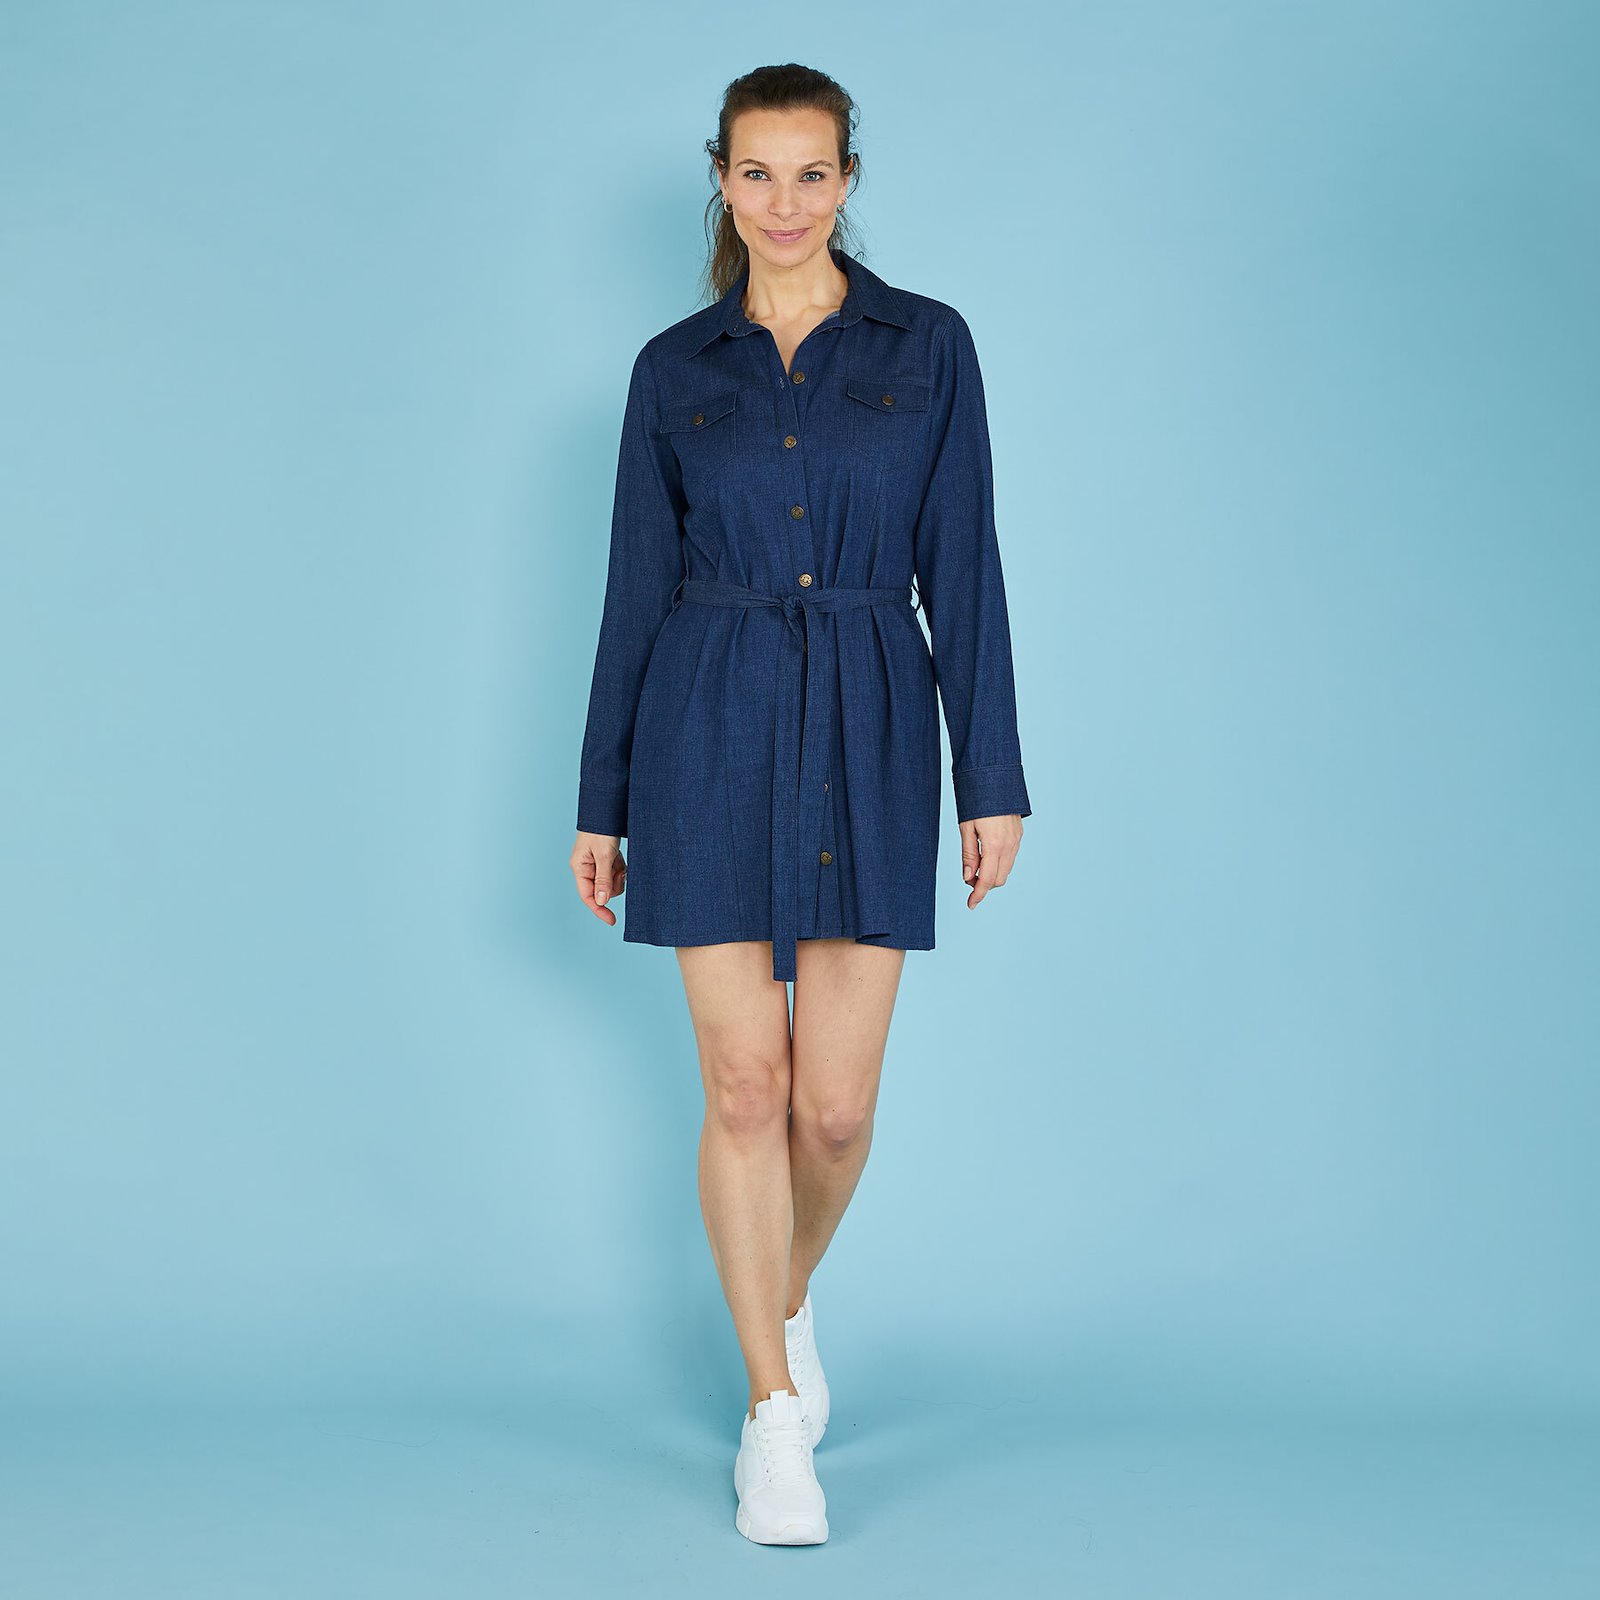 Fitted shirt dress with tie belt, 42/14 p23176000_p23176001_p23176002_p23176003_p23176004_pack_d